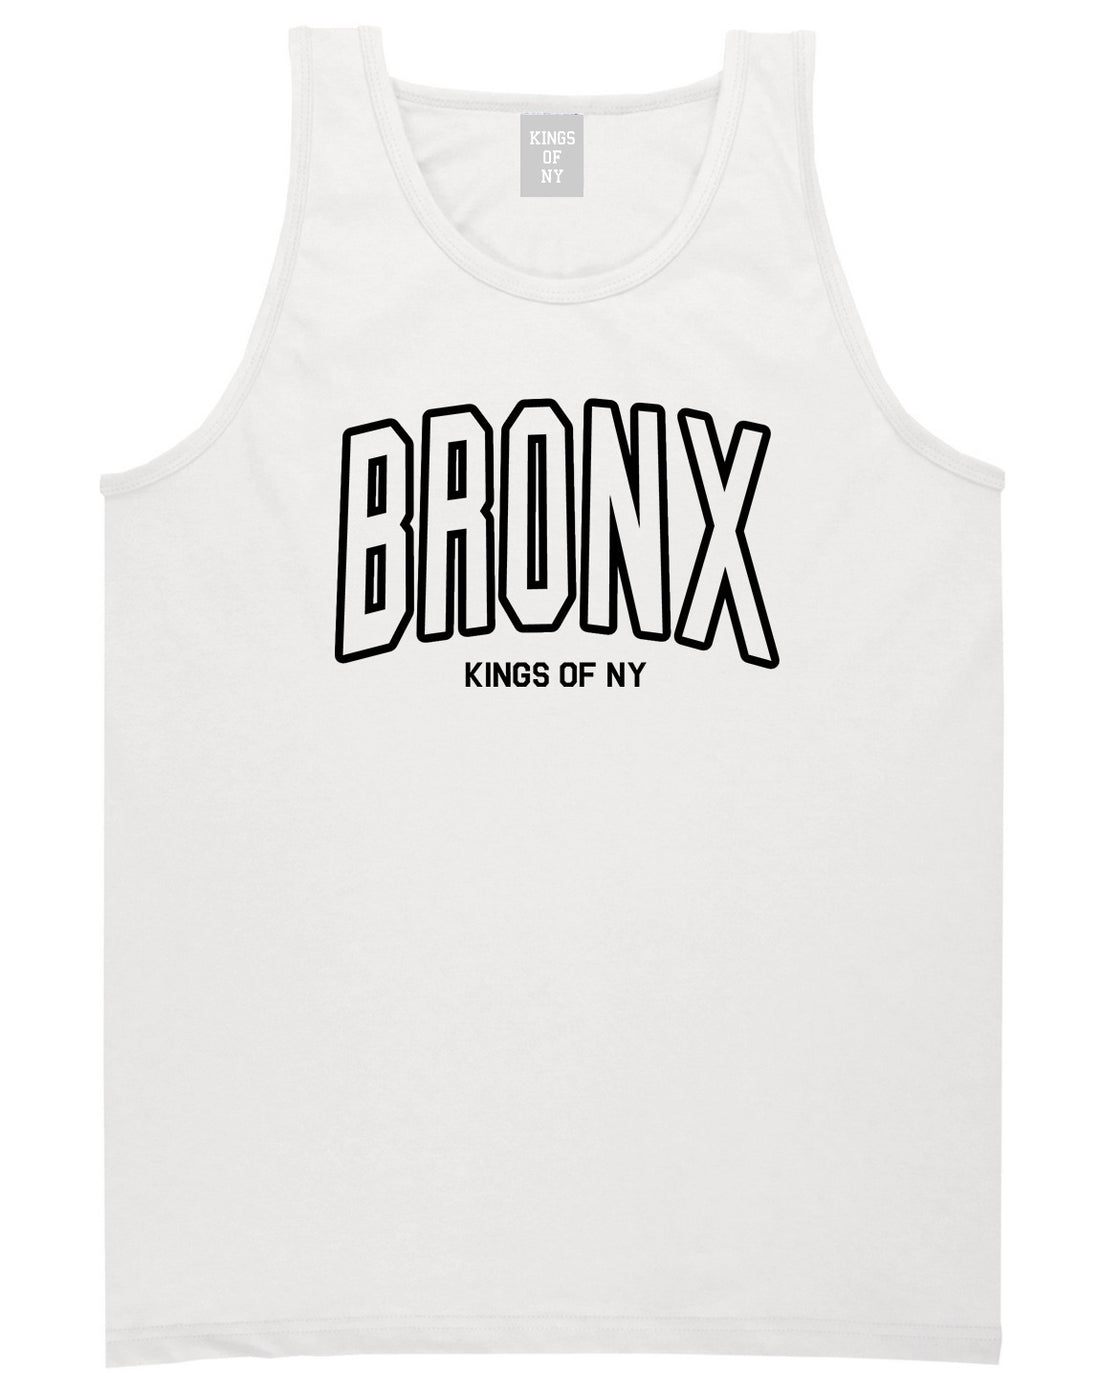 BRONX College Outline Mens Tank Top Shirt White by Kings Of NY